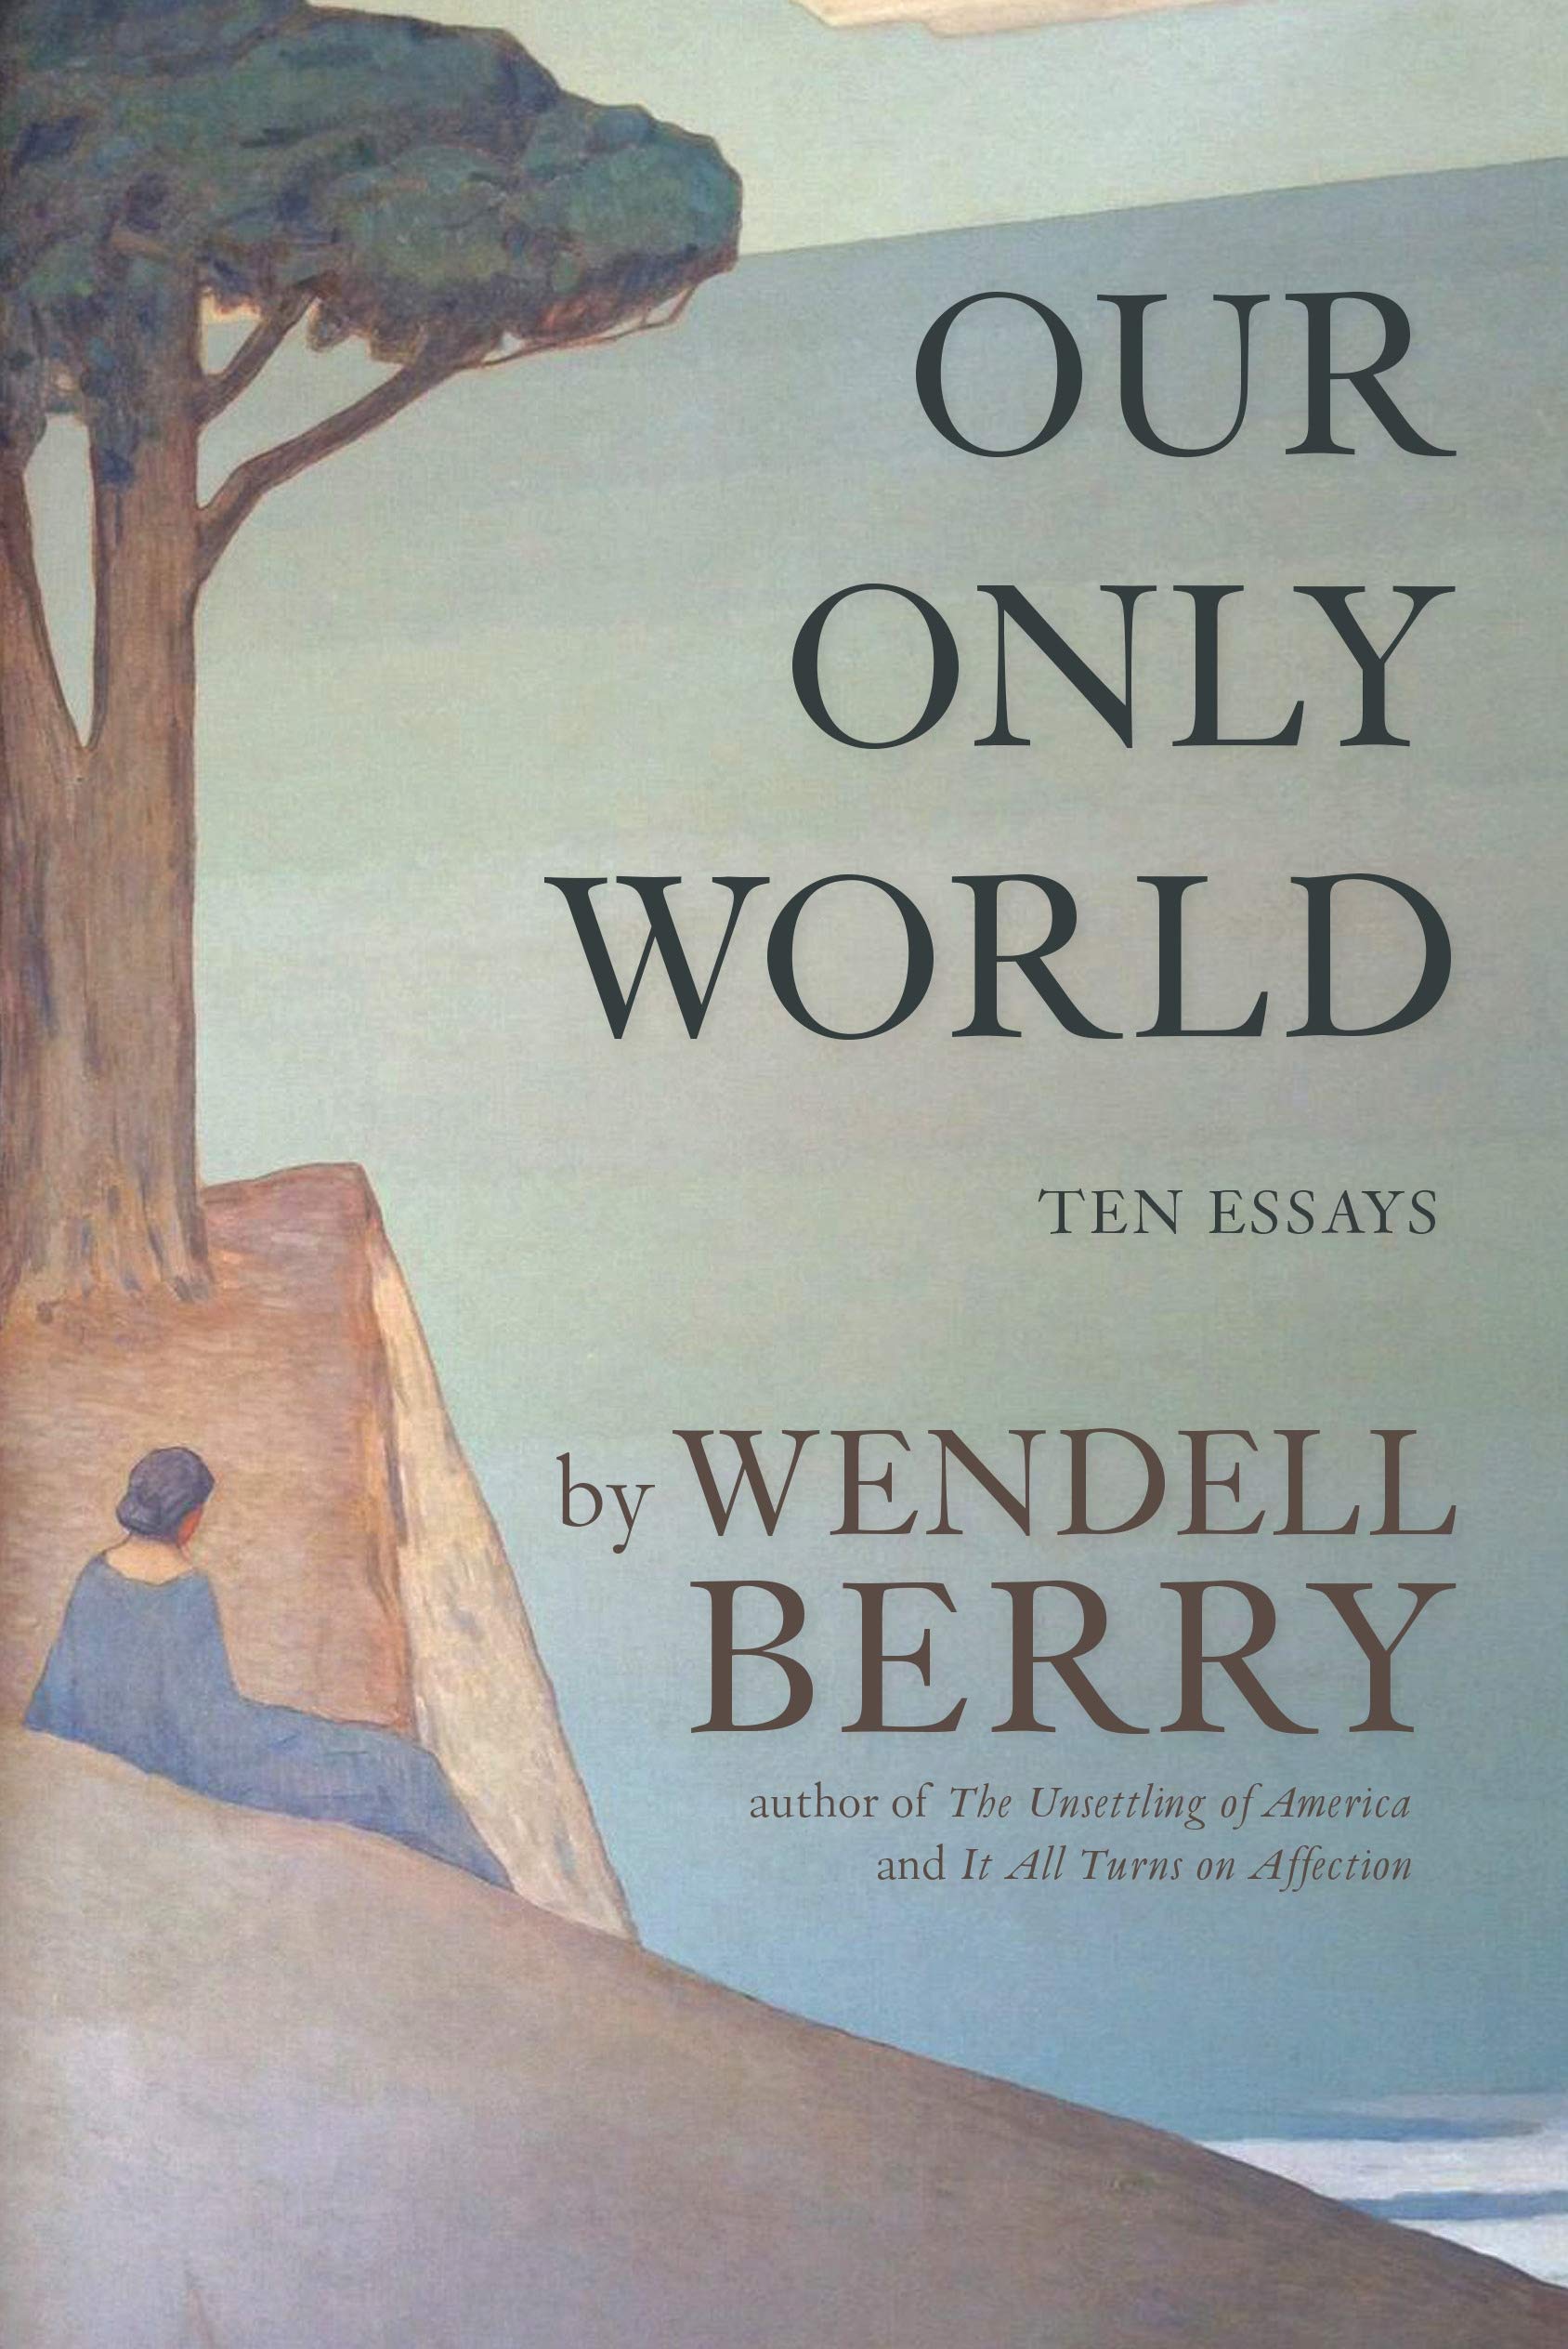 Our Only World by Wendell Berry